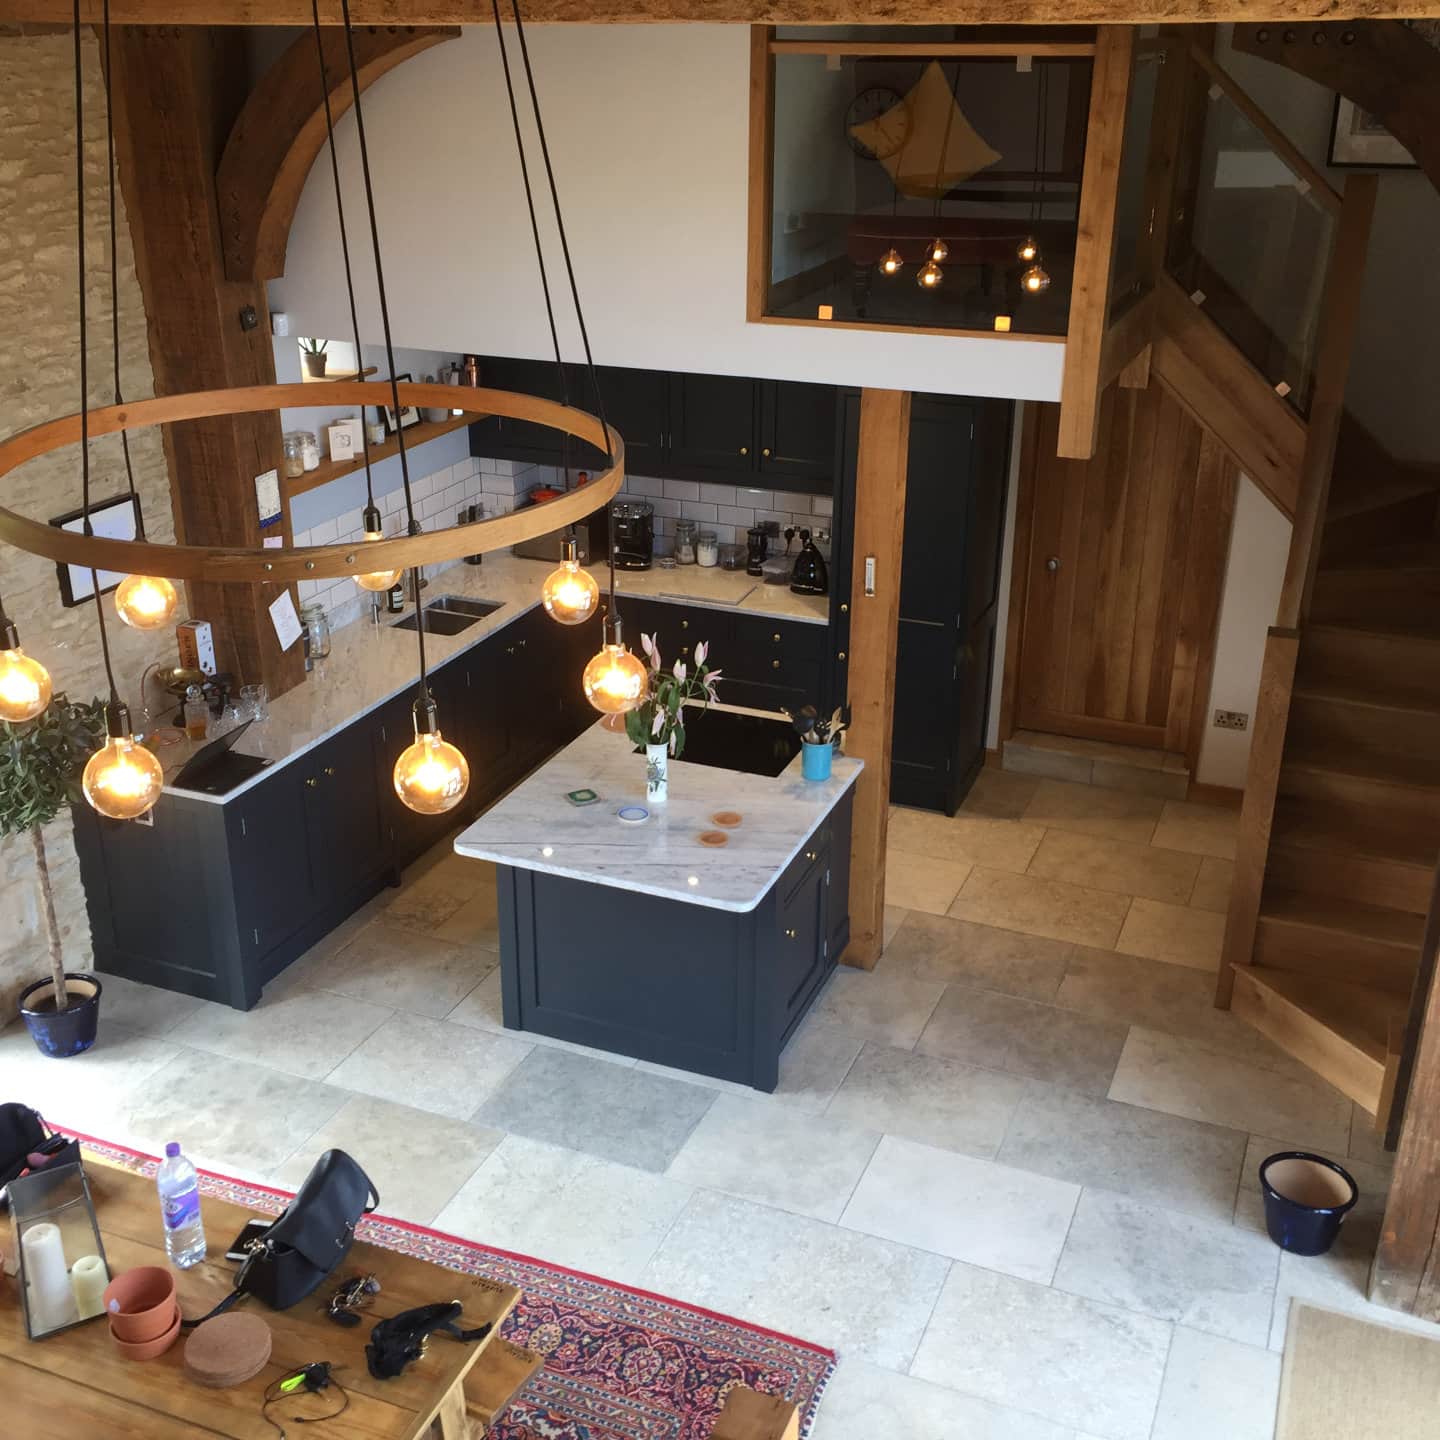 A view through some lights of a bespoke kitchen fitted inside a barn conversion.